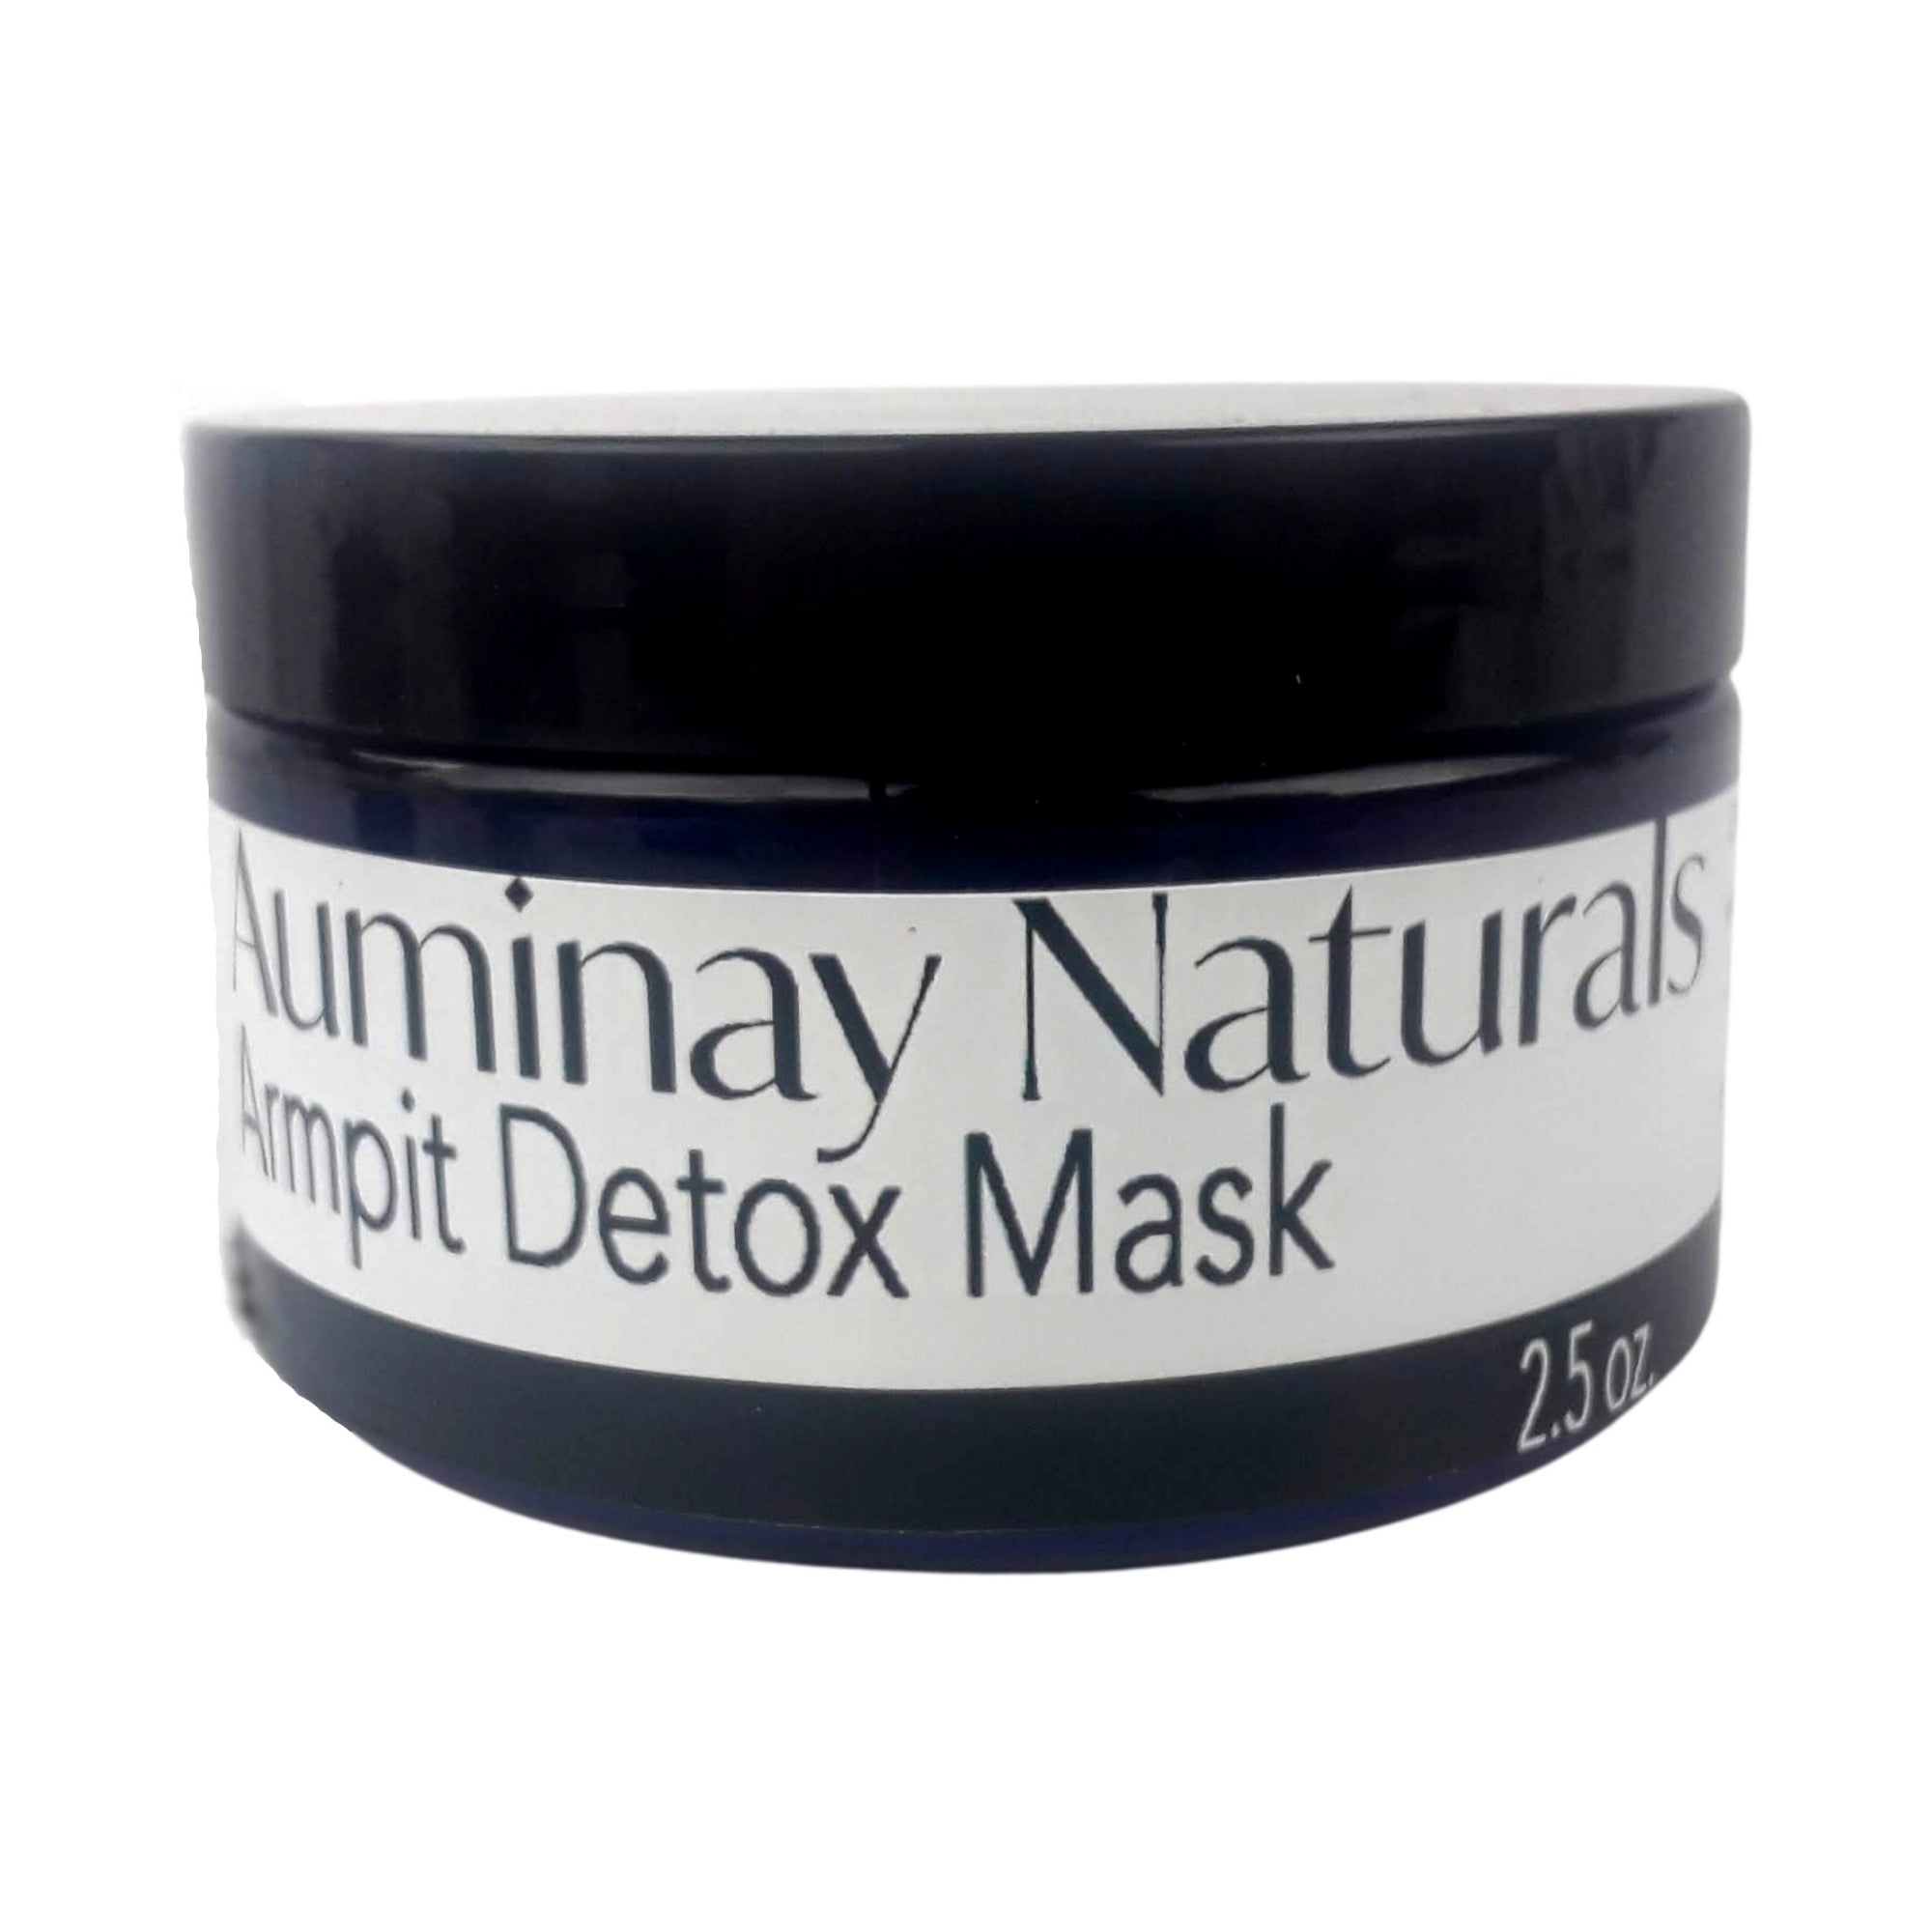 Armpit Detox Mask |Switch to Natural | Auminay Skin Care